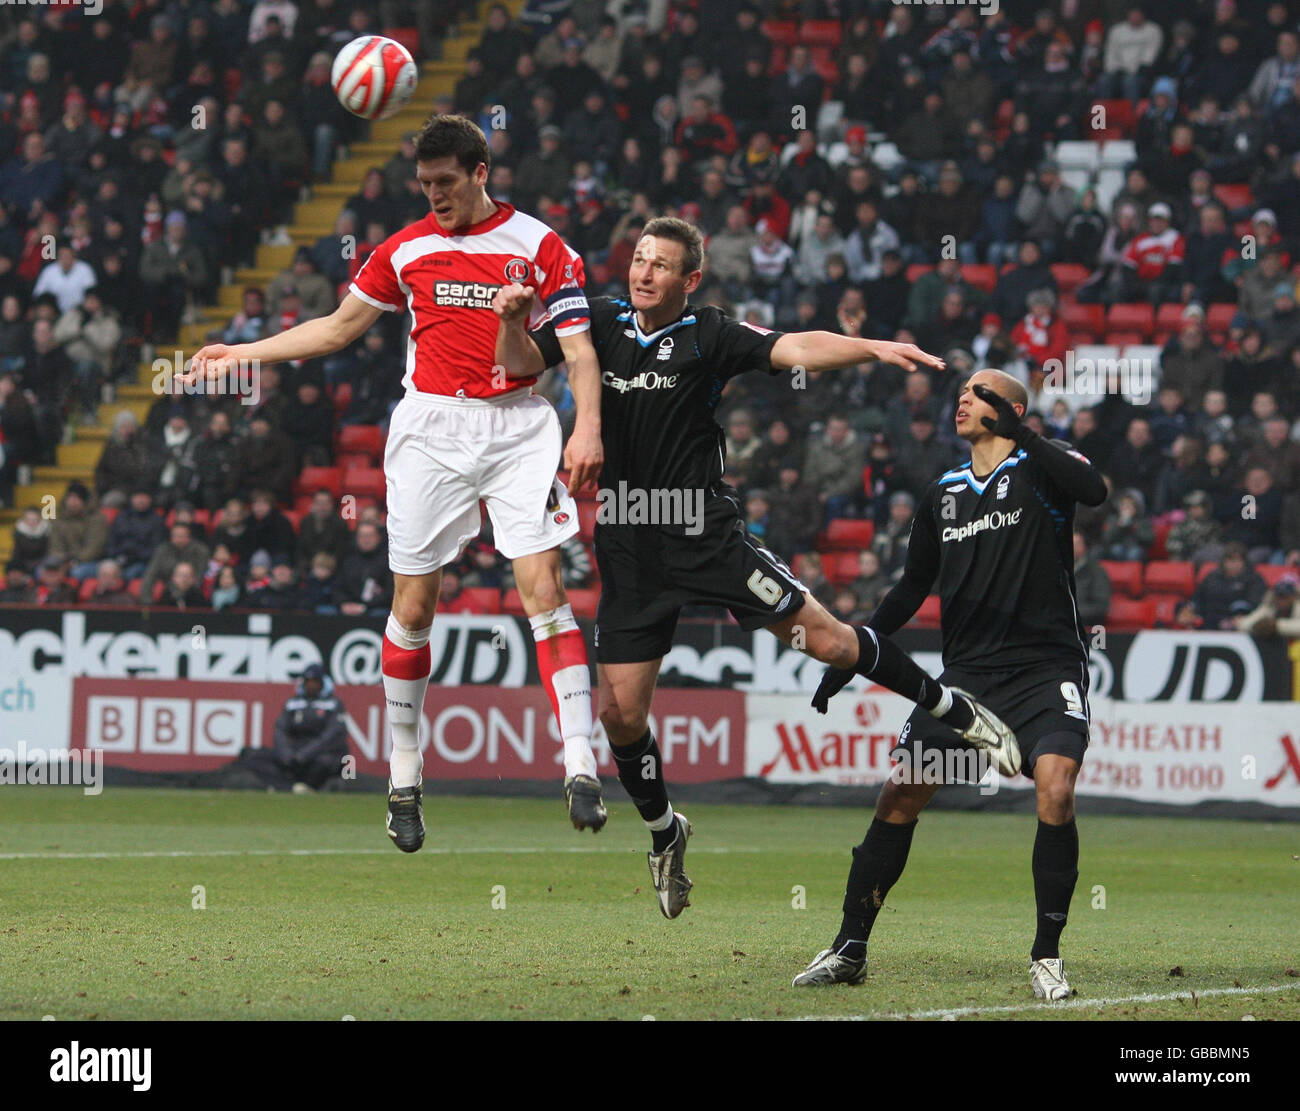 Charlton Athletic's Mark Hudson (left) and Nottingham Forest's Ian Breckin during the Coca-Cola Championship match at The Valley, Charlton. Stock Photo